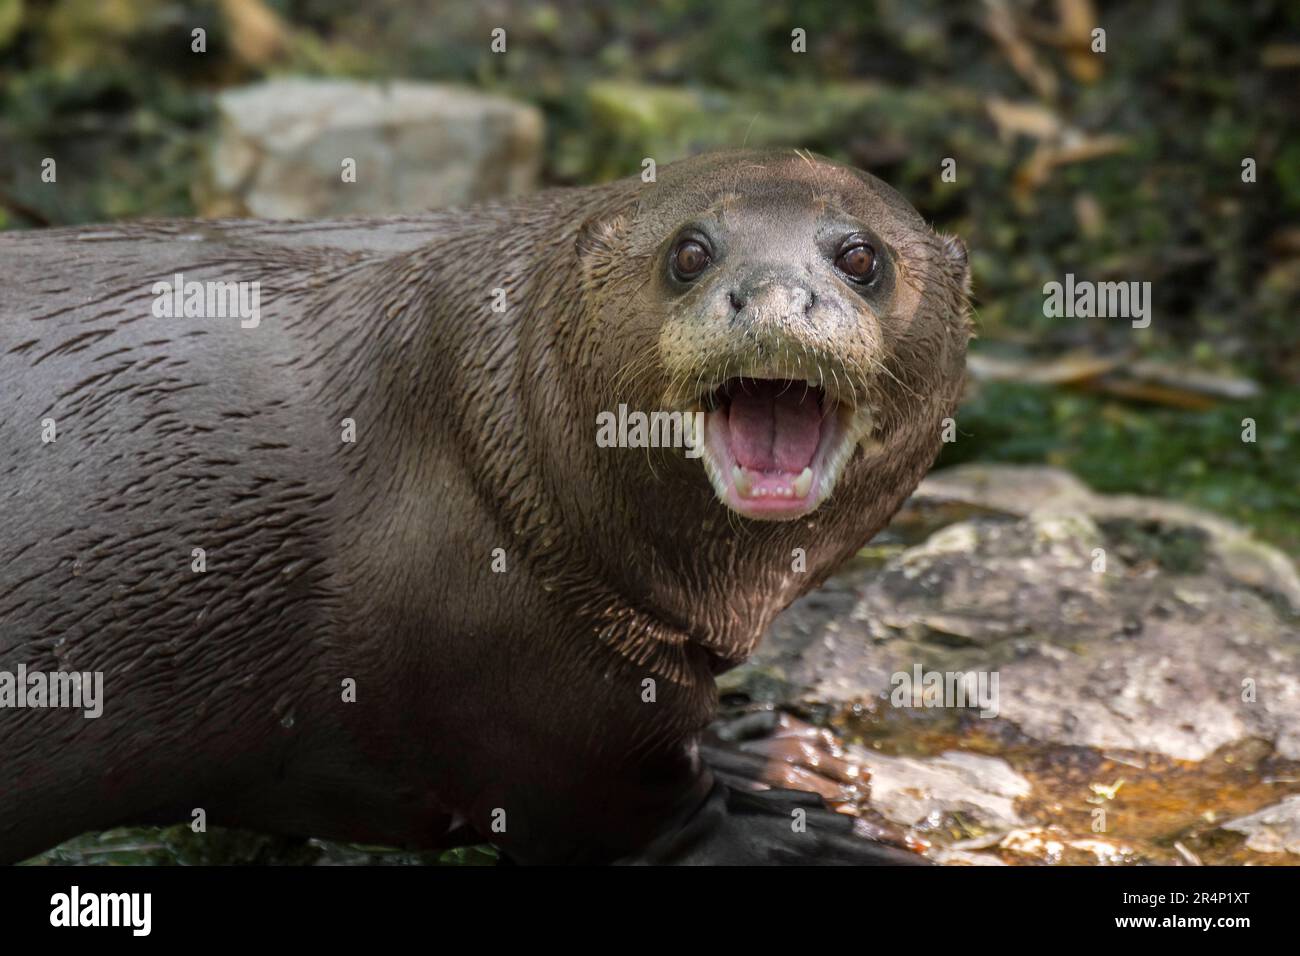 Giant otter / giant river otter (Pteronura brasiliensis) calling, native along the Amazon River in South America Stock Photo